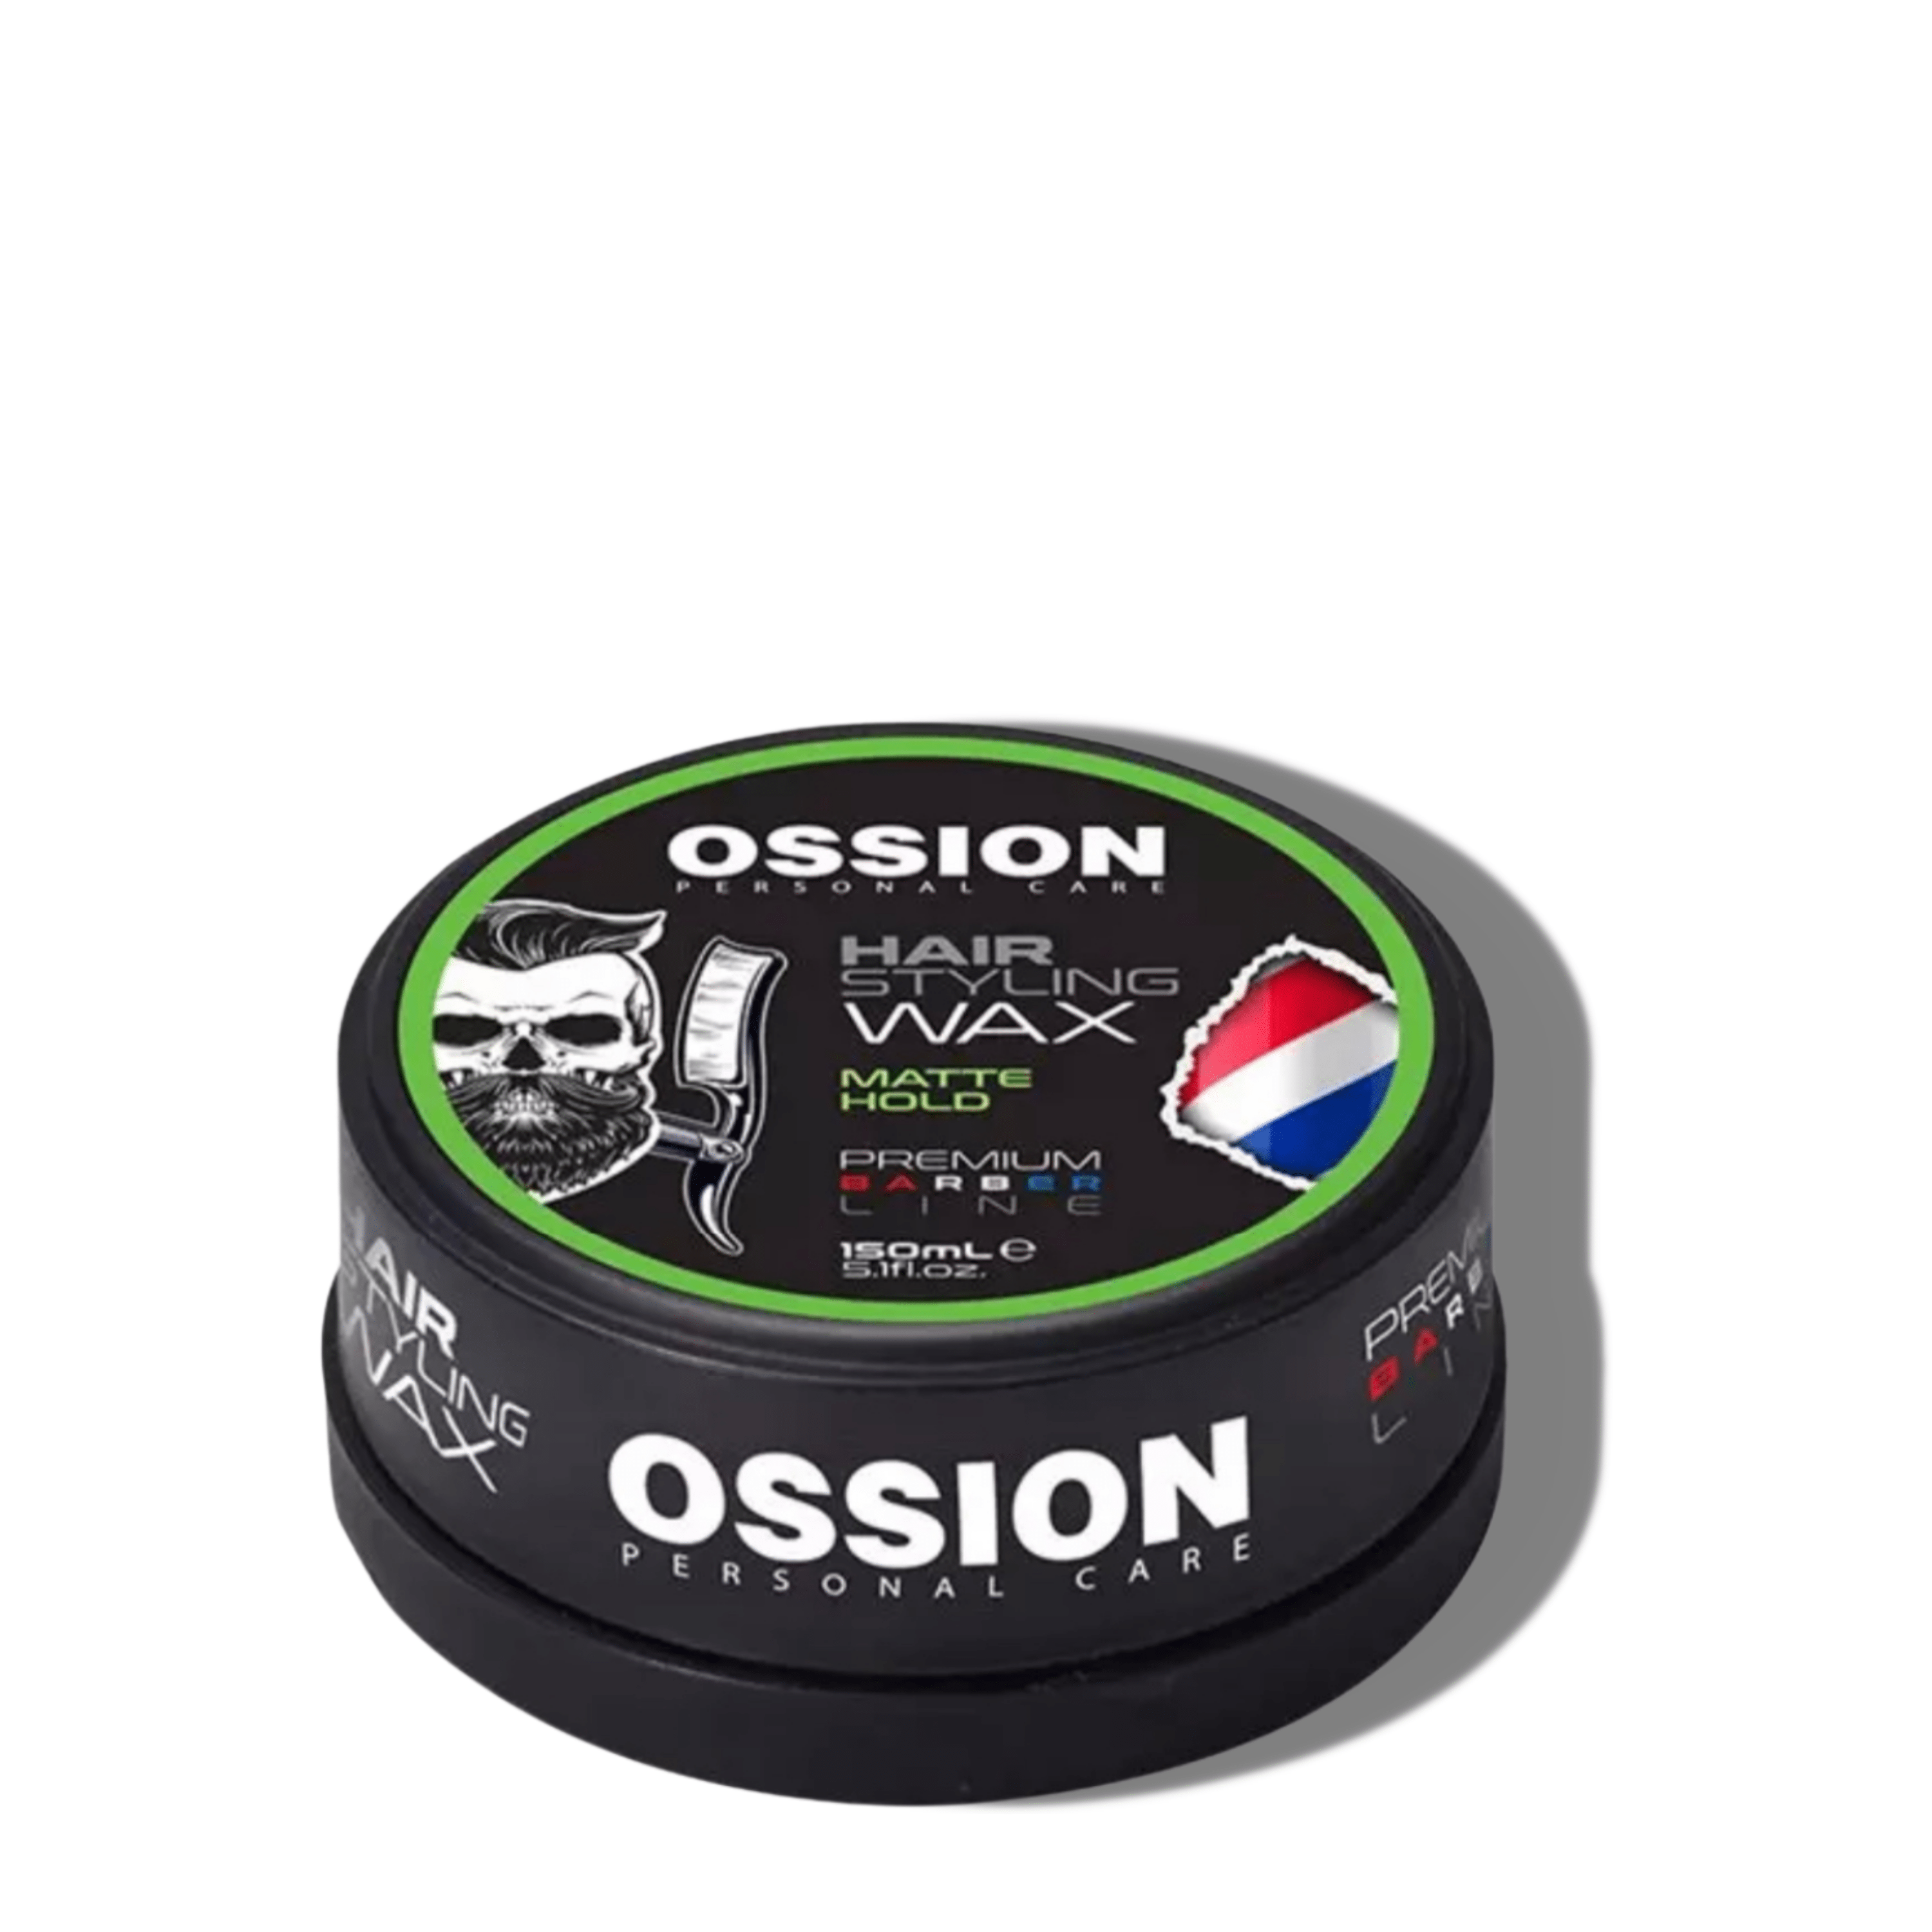 MORFOSE Ossion Premium Barber Matte Hold Hair Wax